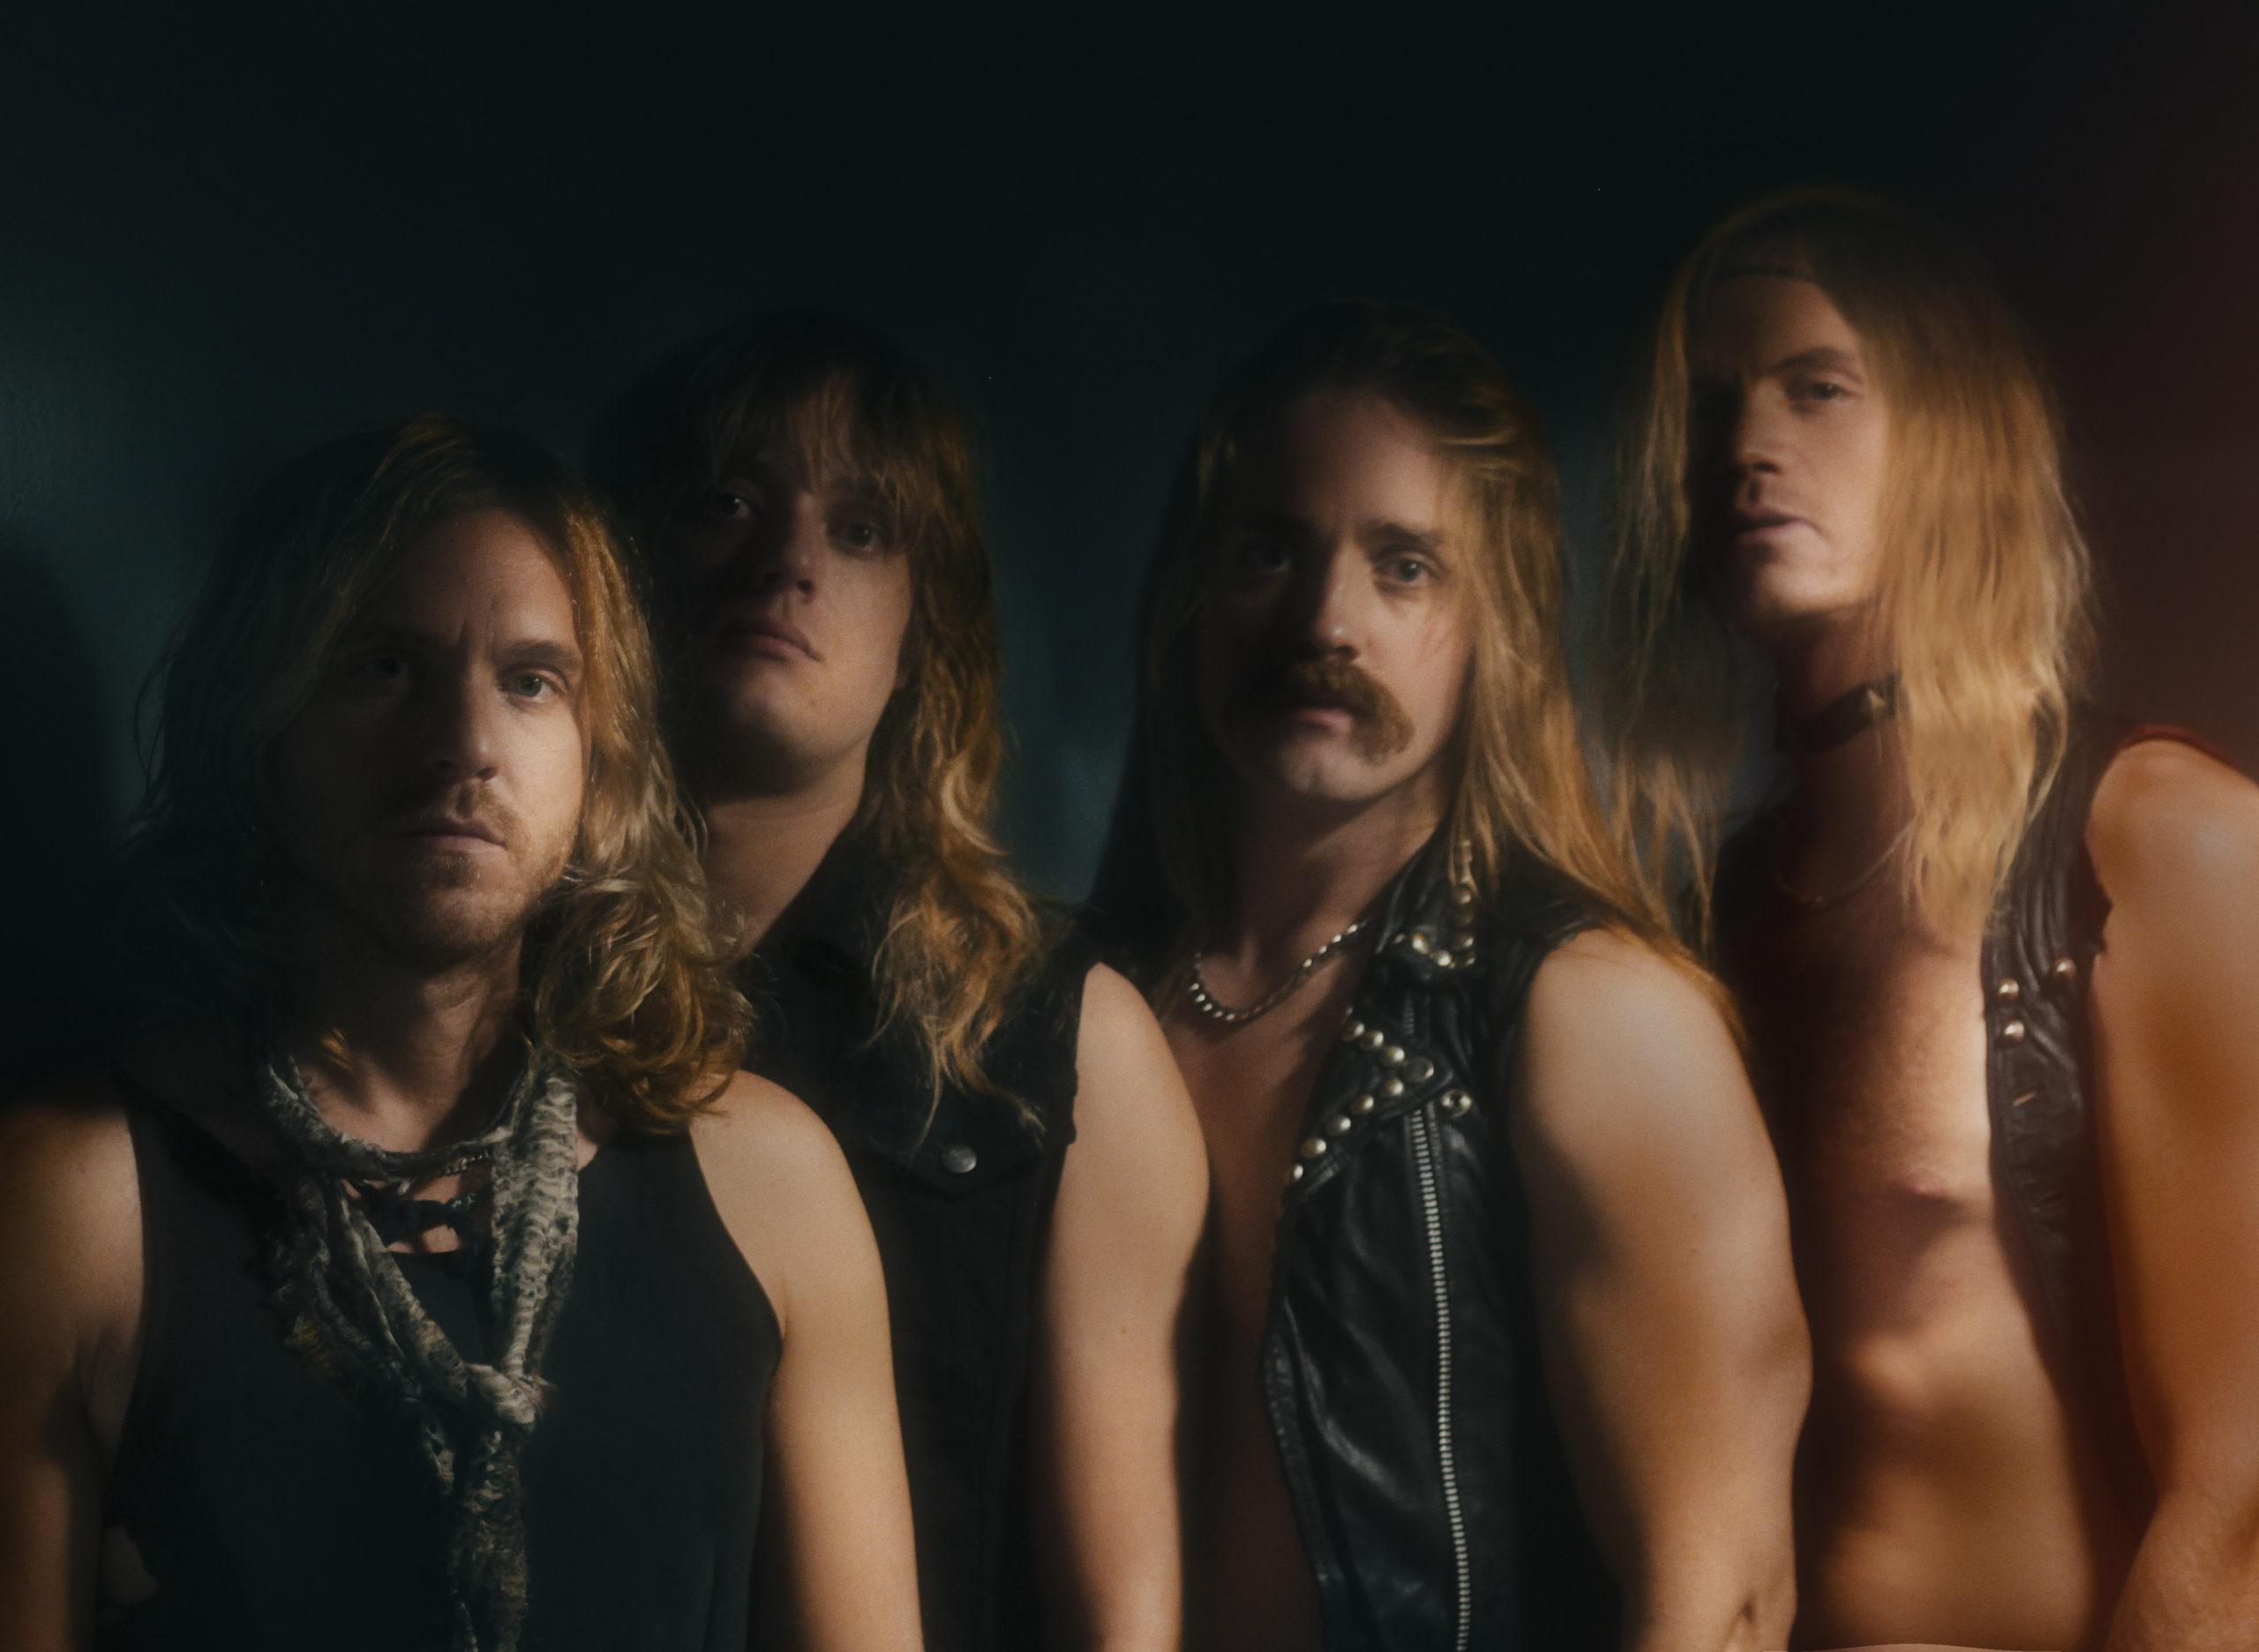 JENNER sign with Fighter Rec.; Re-issue of their 1st album coming soon –  Kronos Mortus News